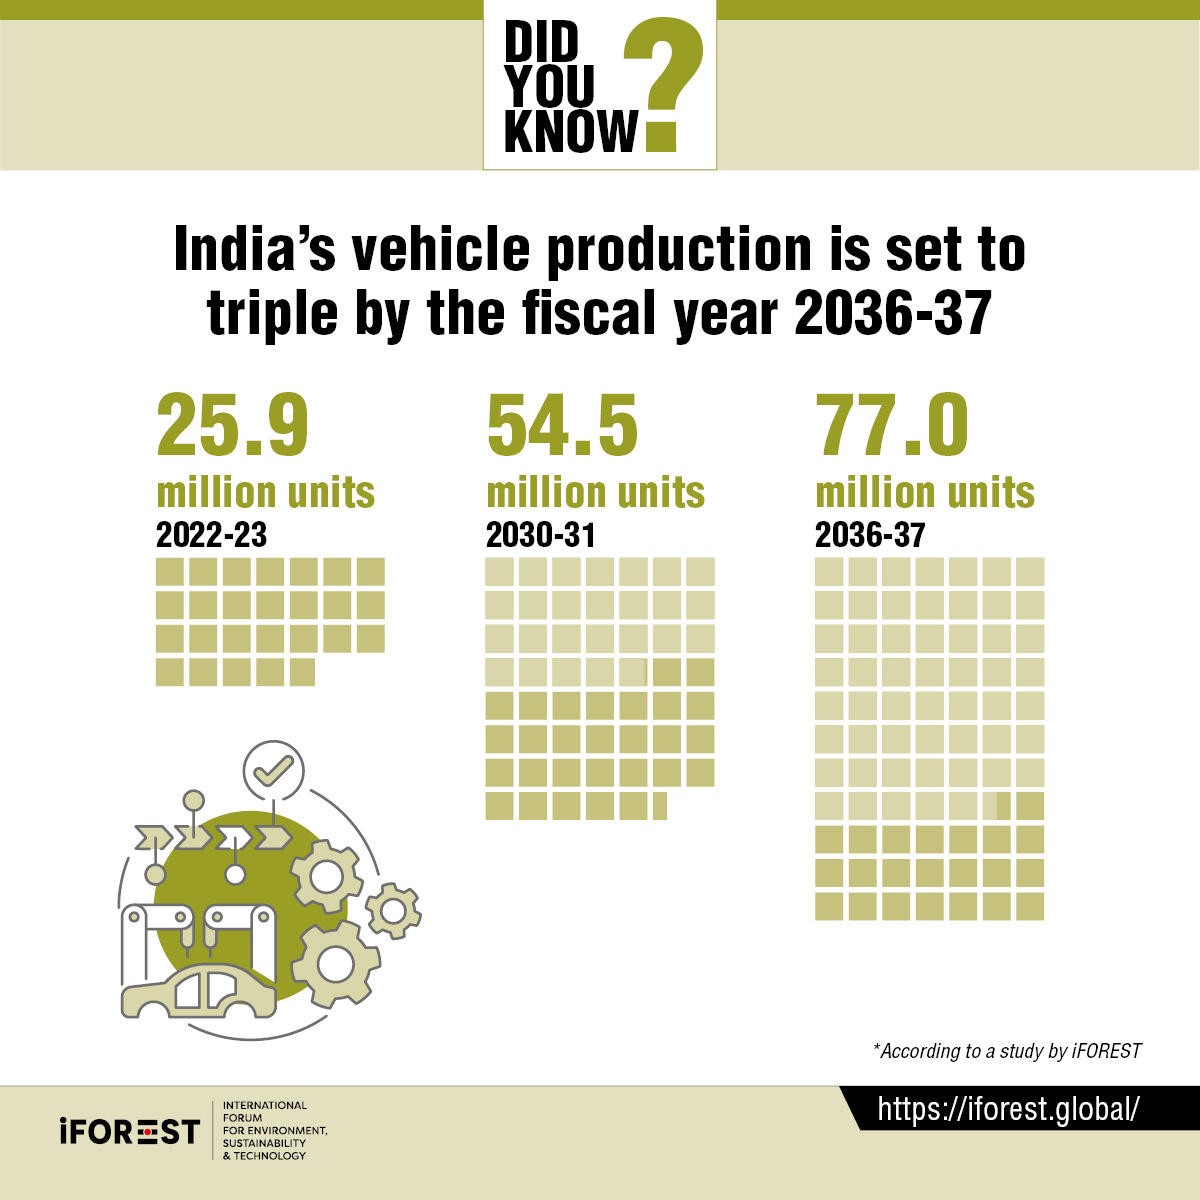 🚗 Projecting growth in India's #automobile production! According to our recent study, '#JustTransition in India's Automobile Sector', domestic automobile production (inclusive of #EV) is set to triple by 2036-37. Access the full report here: rb.gy/wn4tdz